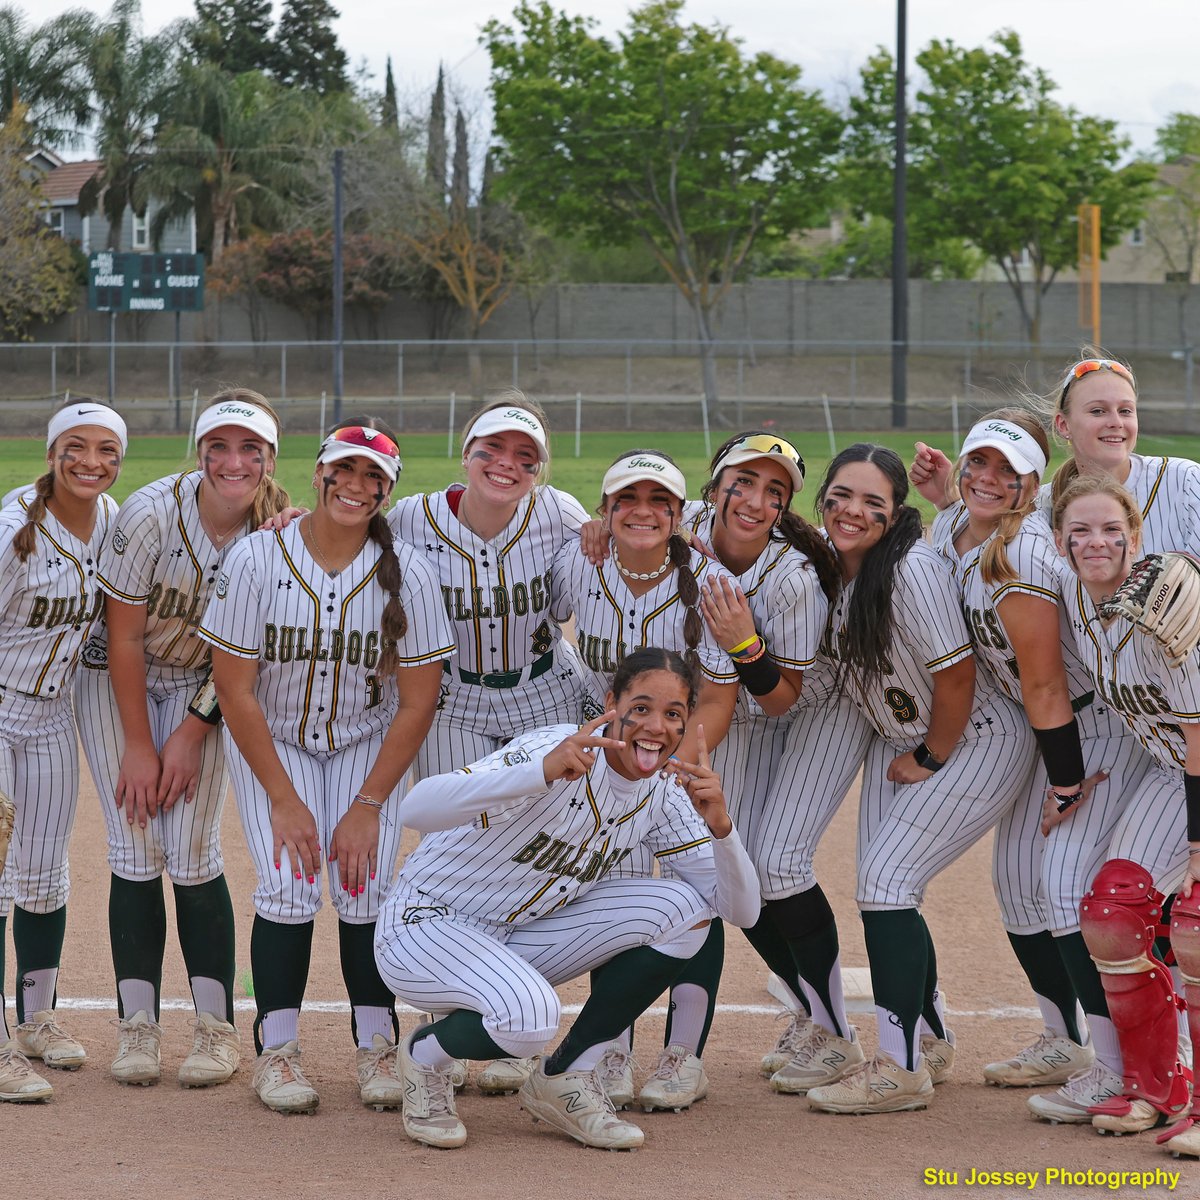 Top seeded Tracy will host Bear Creek on Tuesday in Round 1 of the CIF-SJS Division 2 Softball Playoffs. If the Bulldogs can win in Round 1, they will continue to host on Thursday the winner of St. Mary's vs Granite Bay.